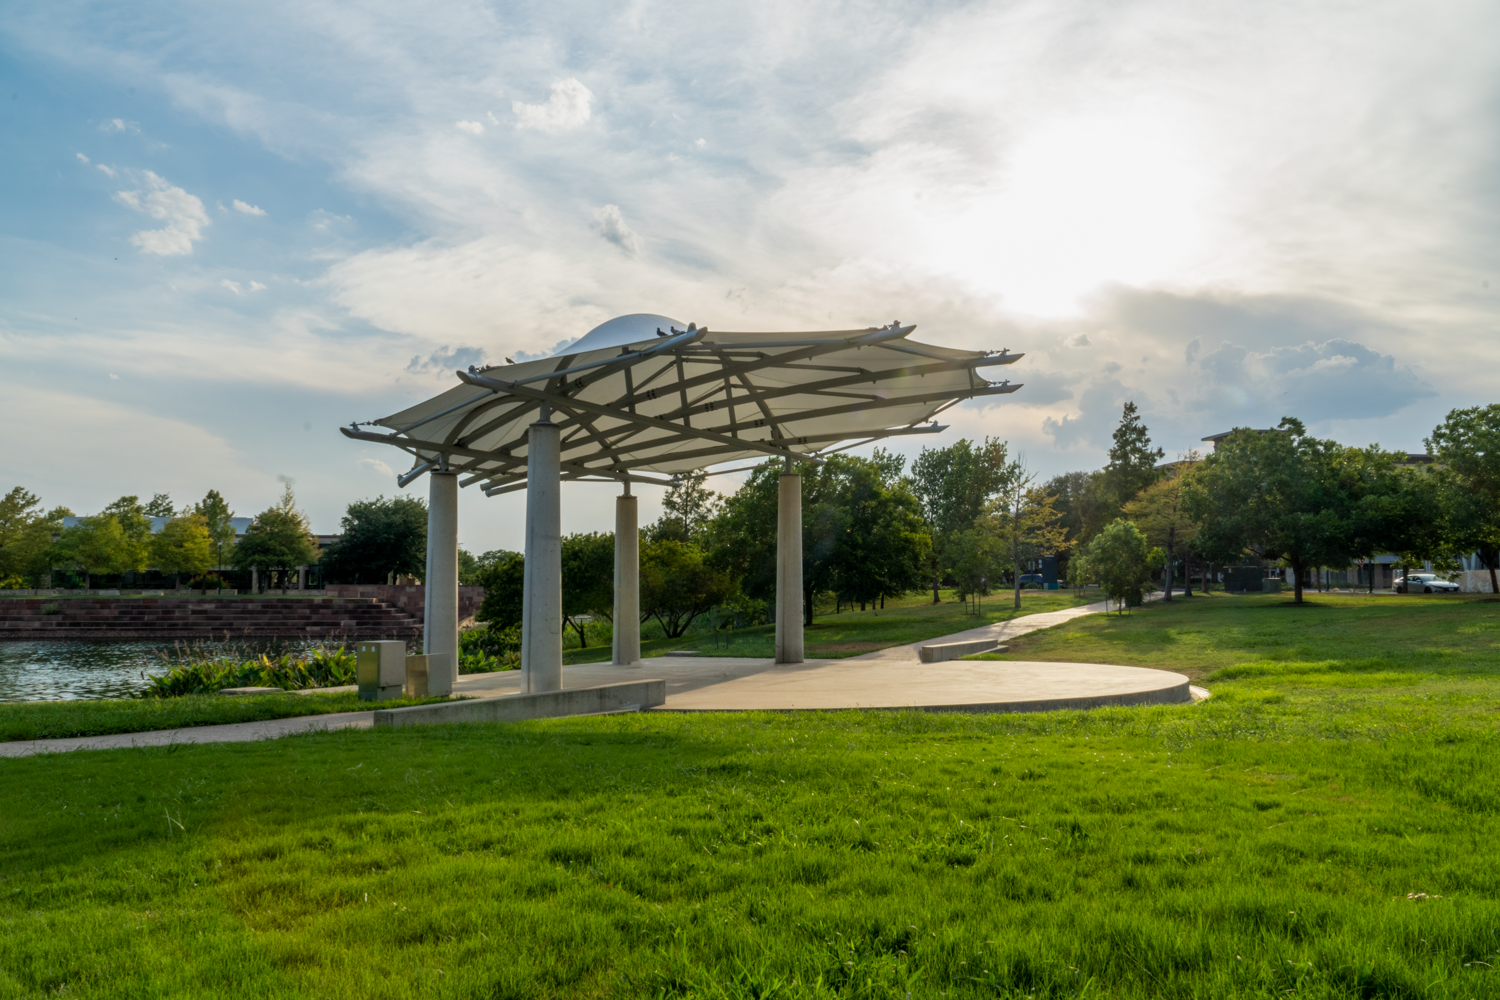 large sun shade covering amphitheater in park